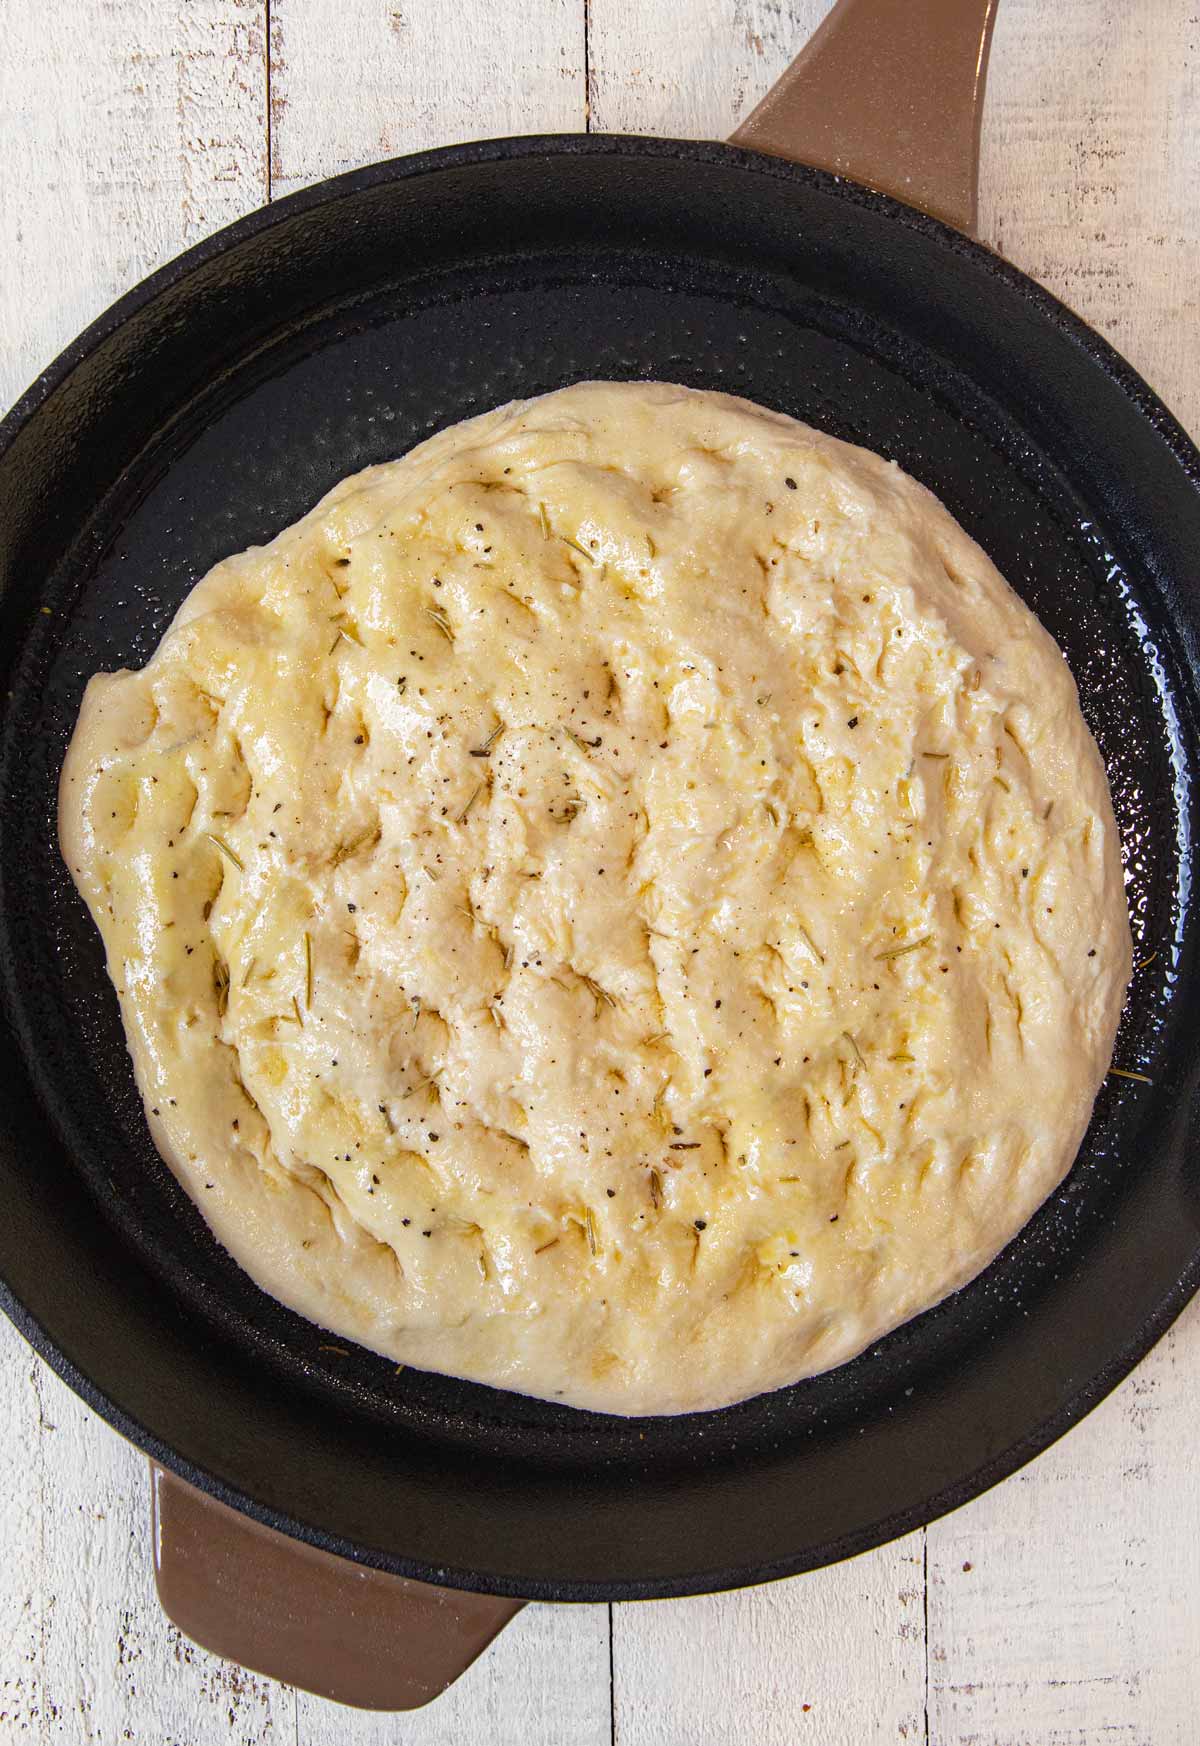 Rosemarry Foccacia Bread in cast iron skillet before cooking